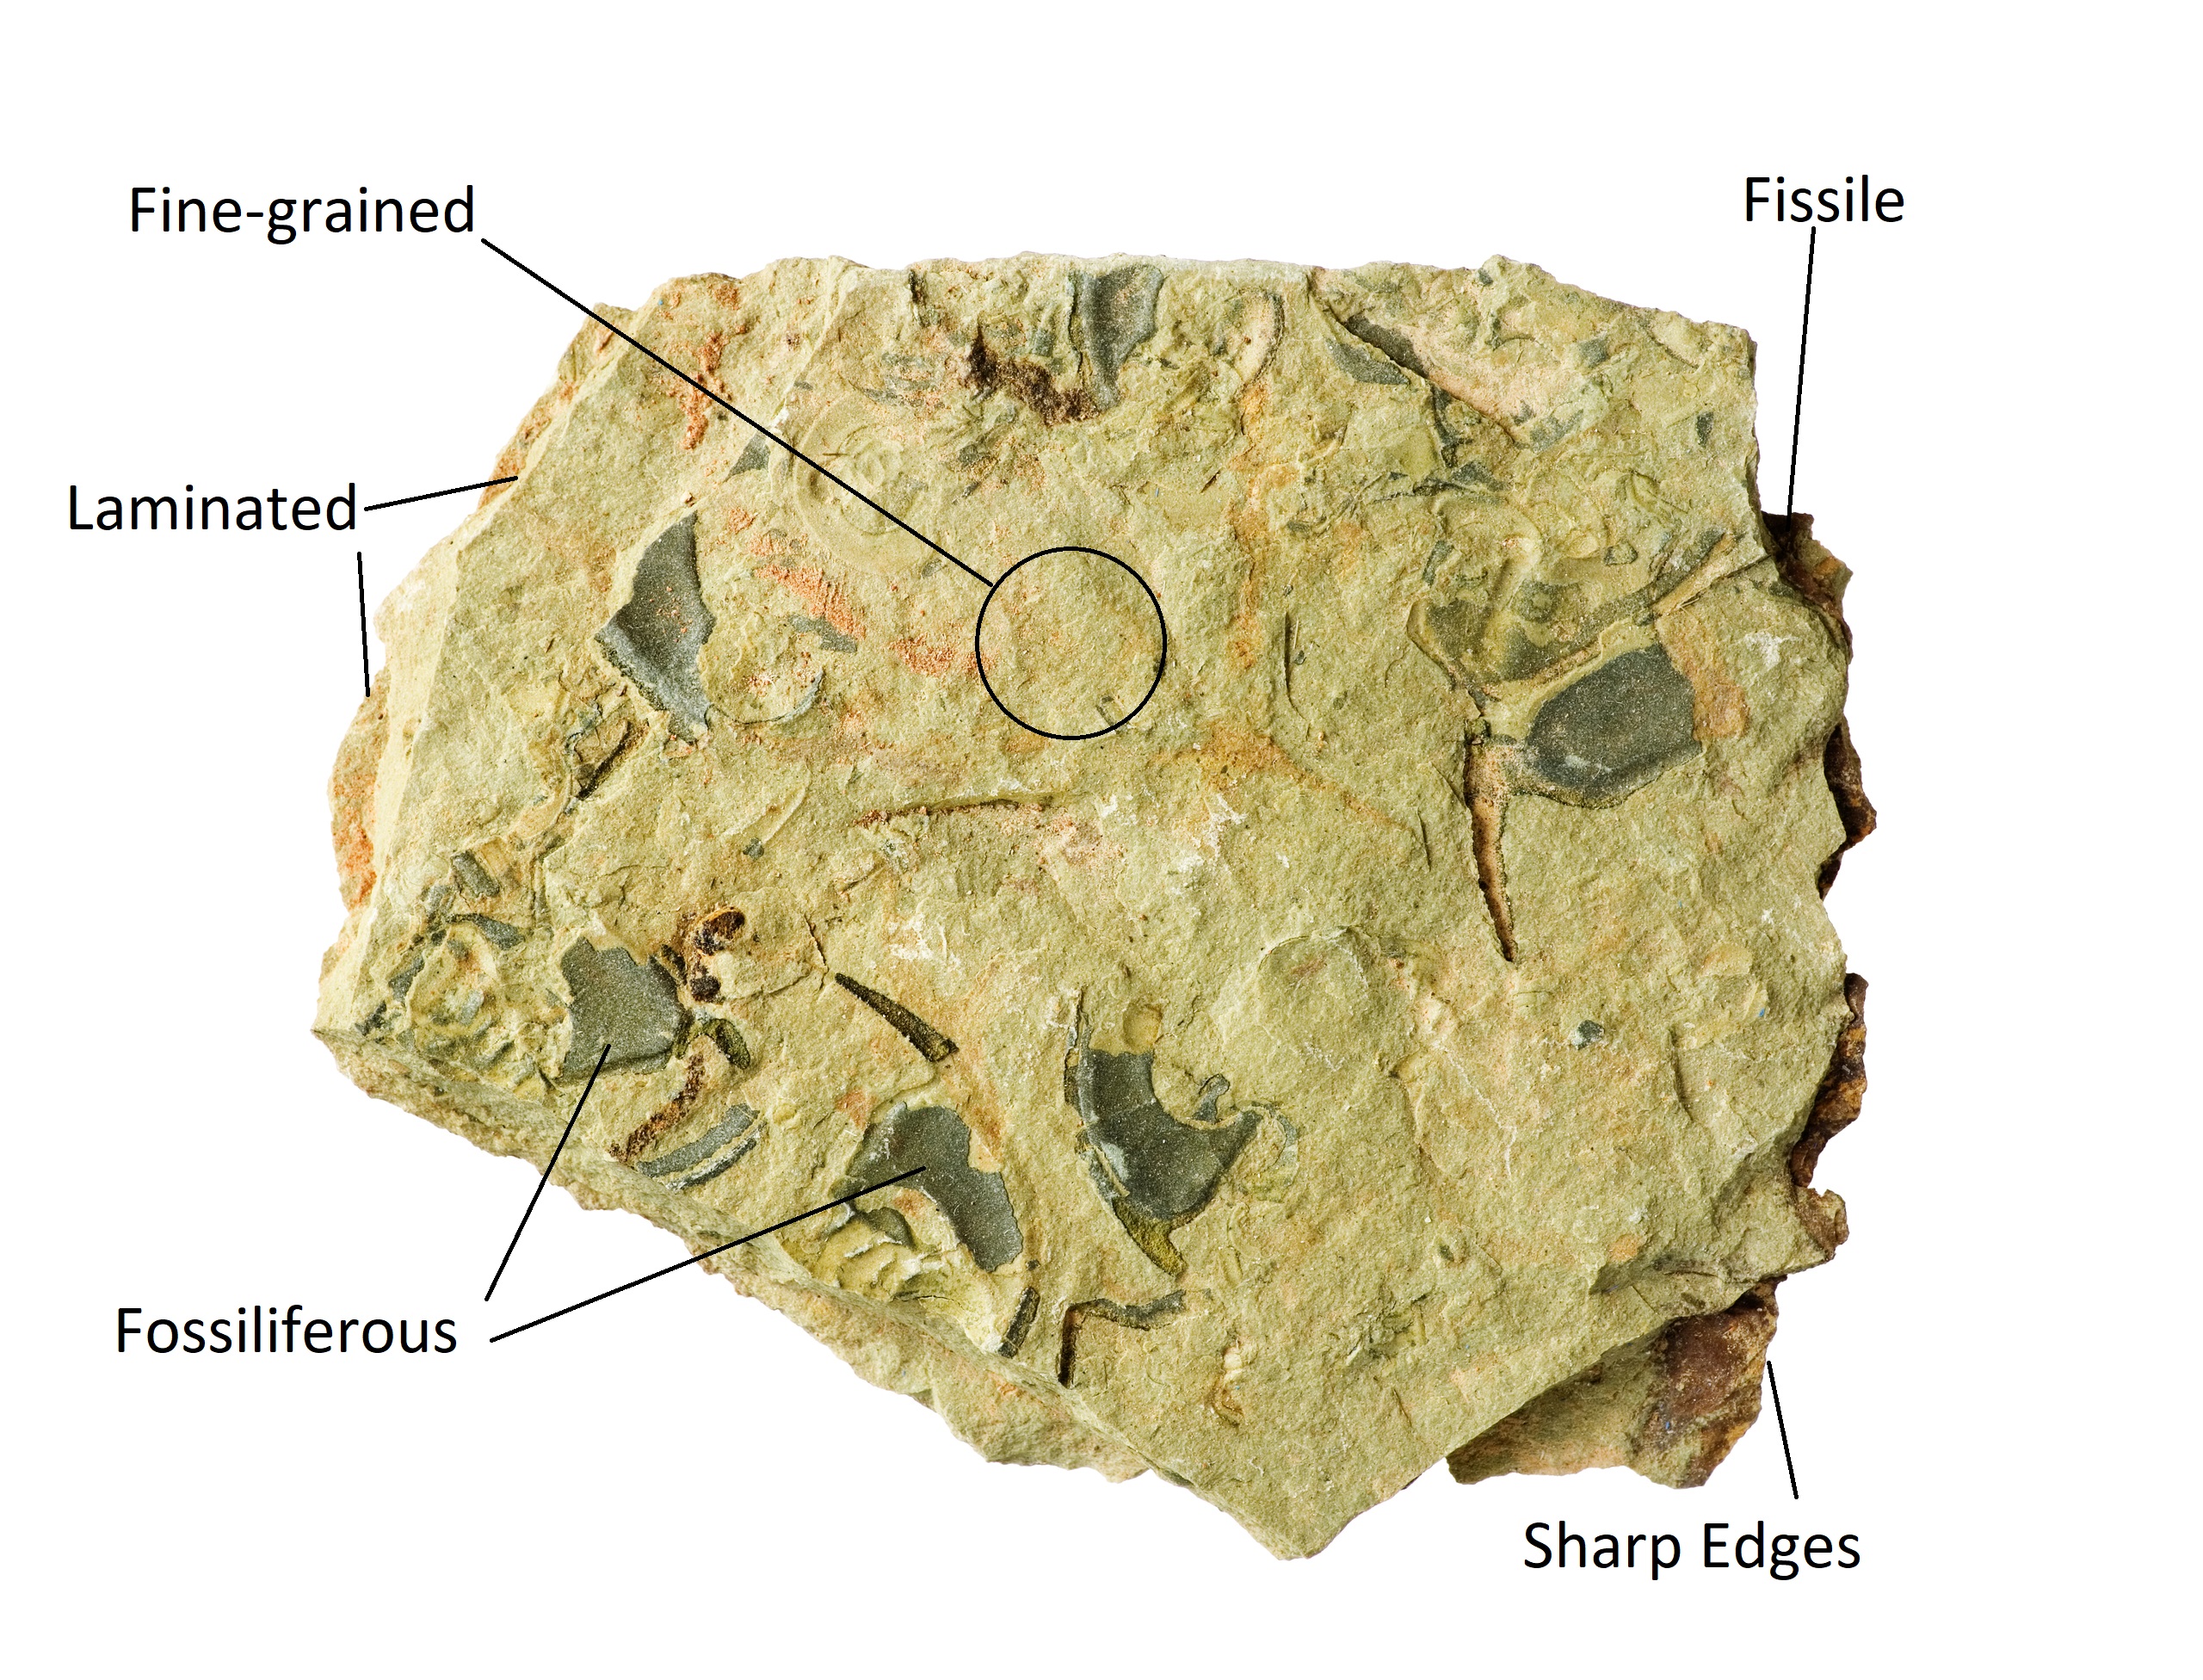 Brown shale displaying fossils, fine-grained texture, lamination, fissility, and sharp edges